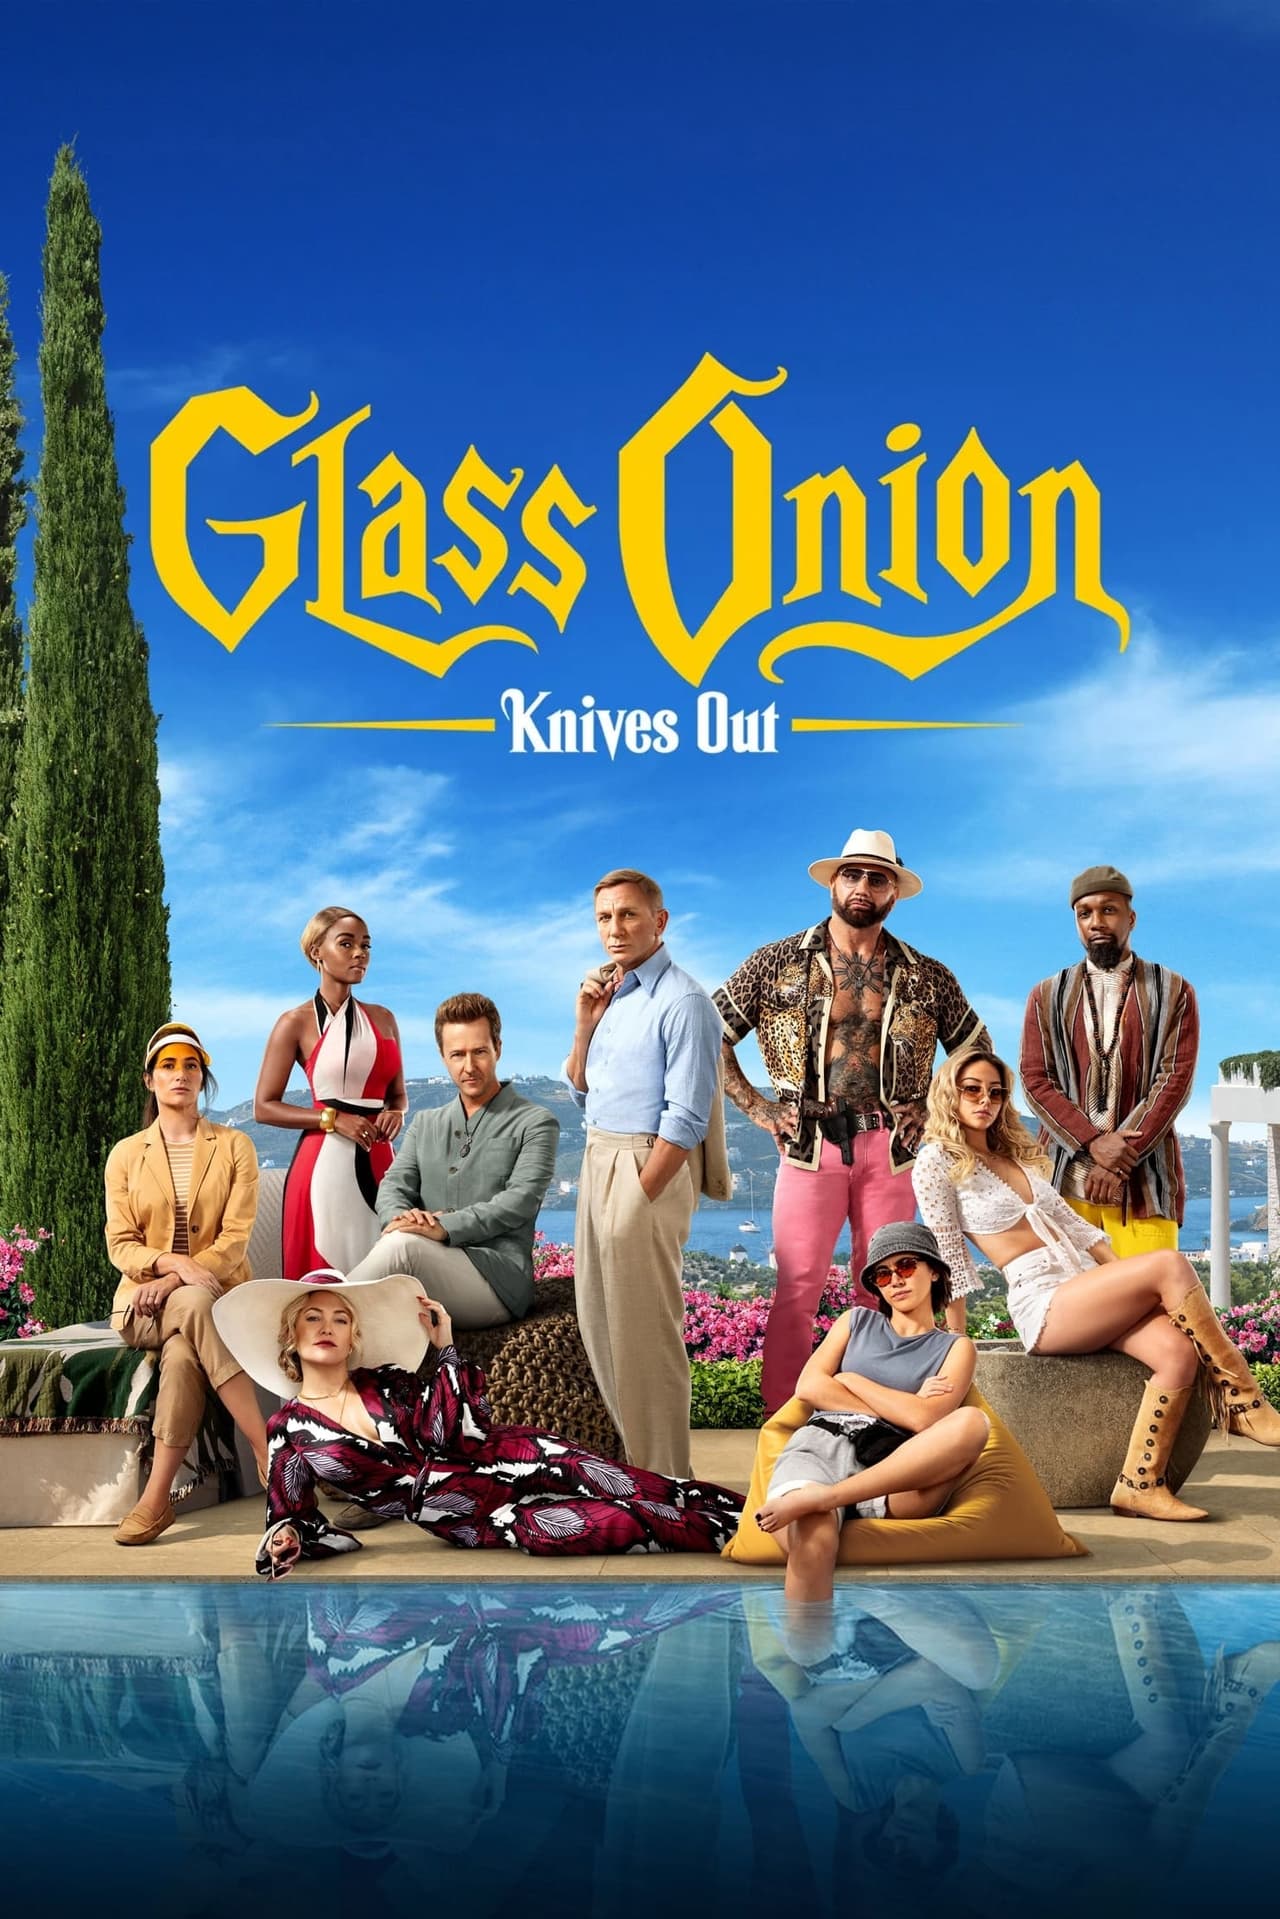 Glass Onion – Knives Out